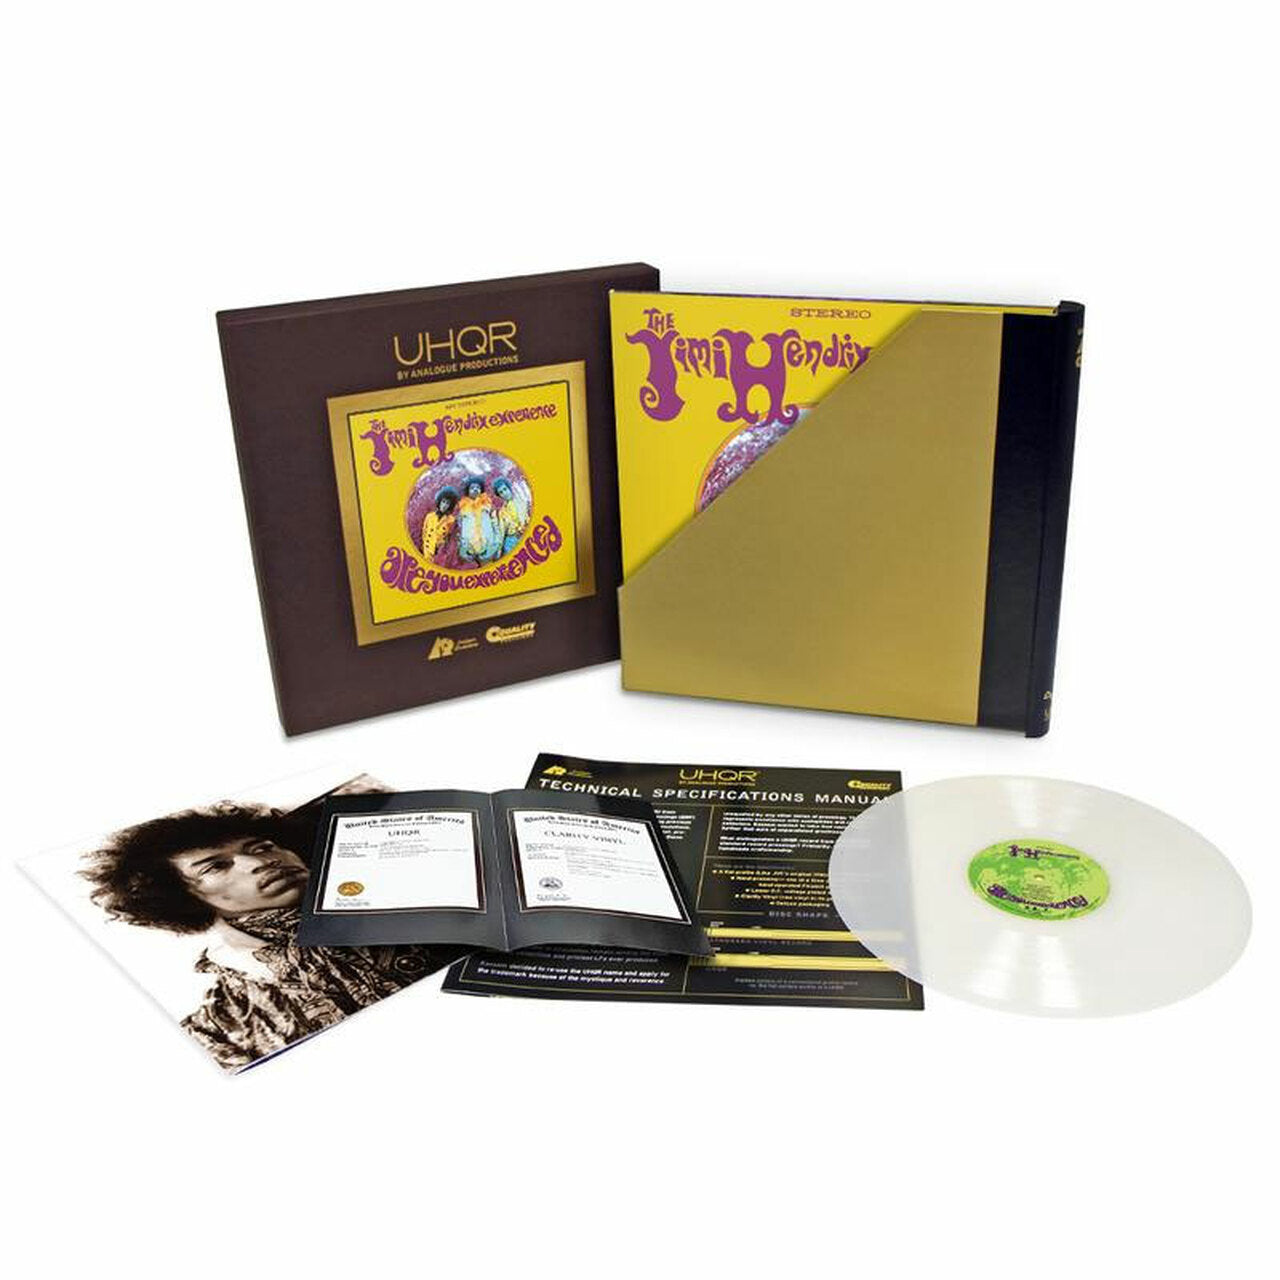 The Jimi Hendrix Experience - Are You Experienced? [200 Gram Clarity UHQR Vinyl]